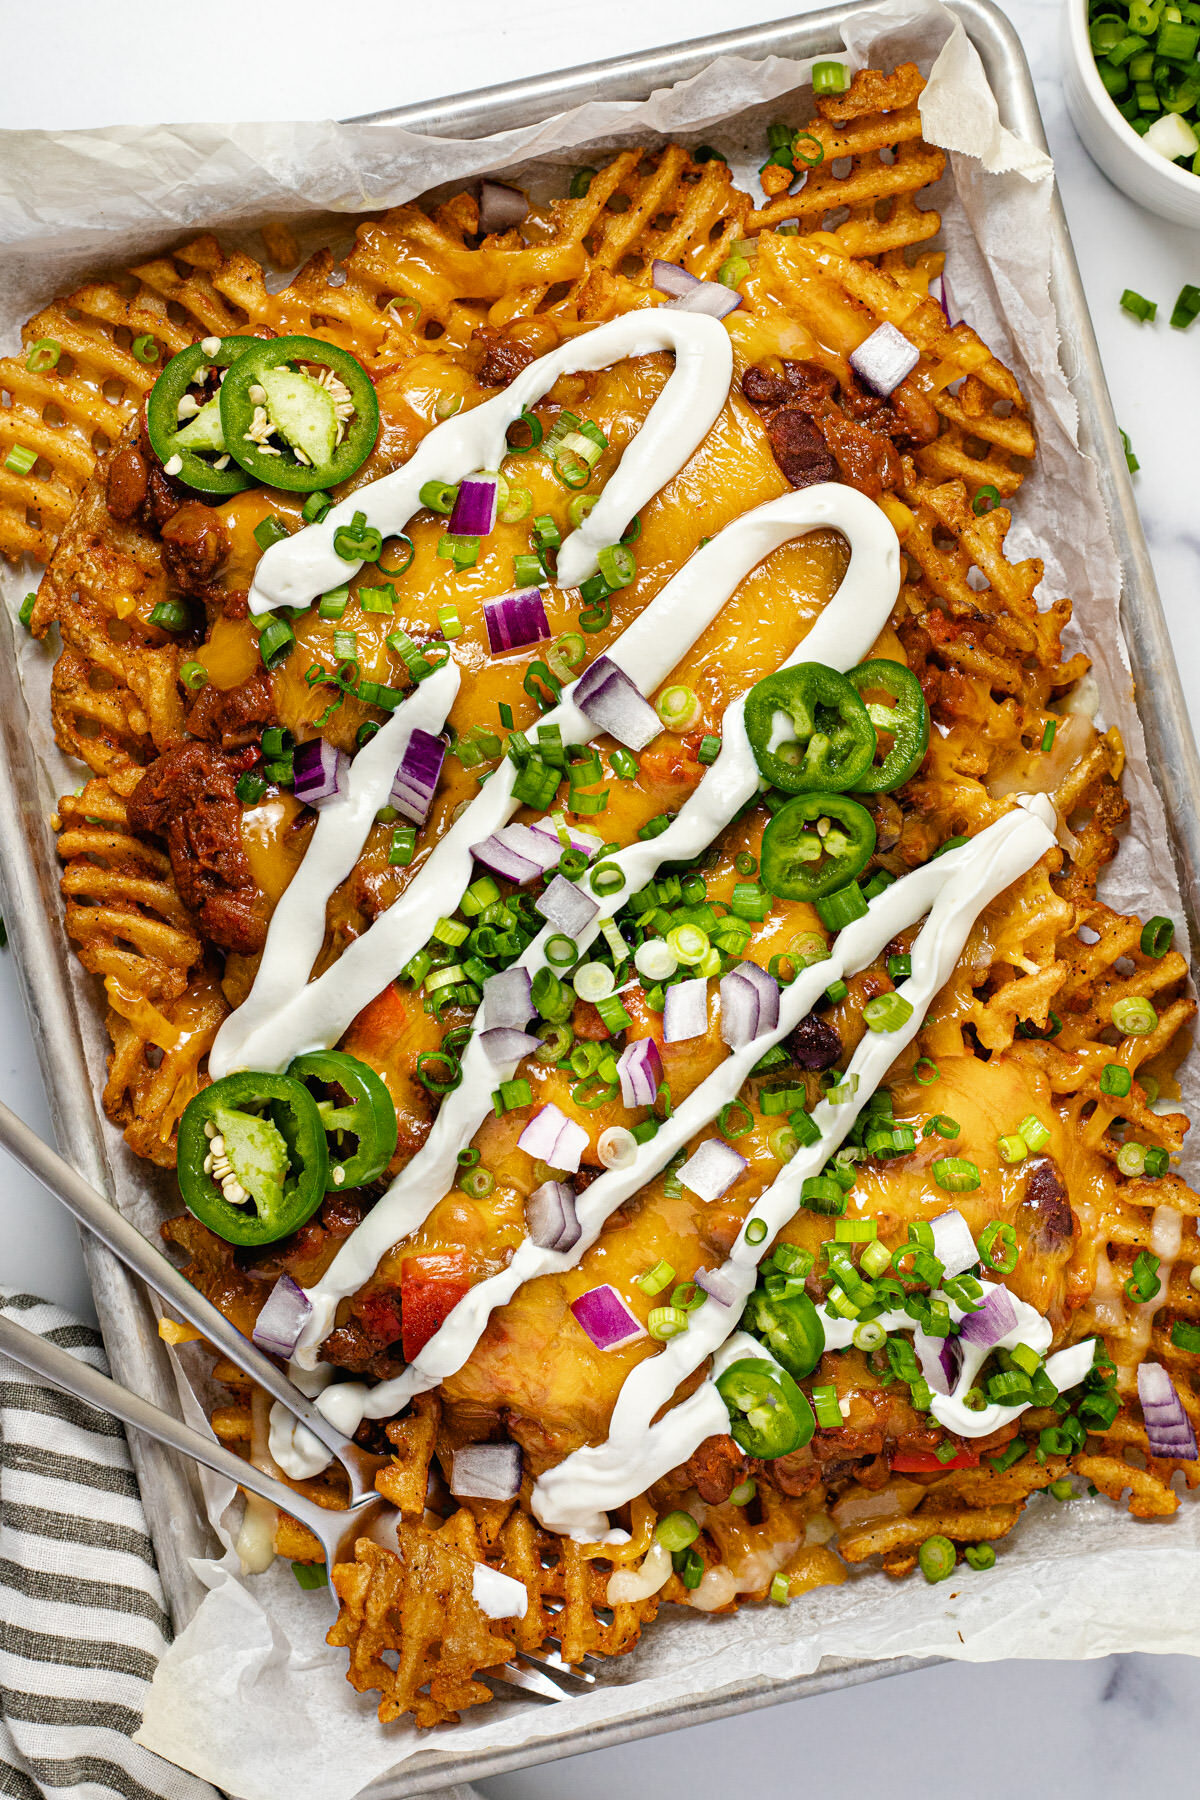 Chili cheese fries on a baking sheet drizzled with sour cream and garnished with green onion